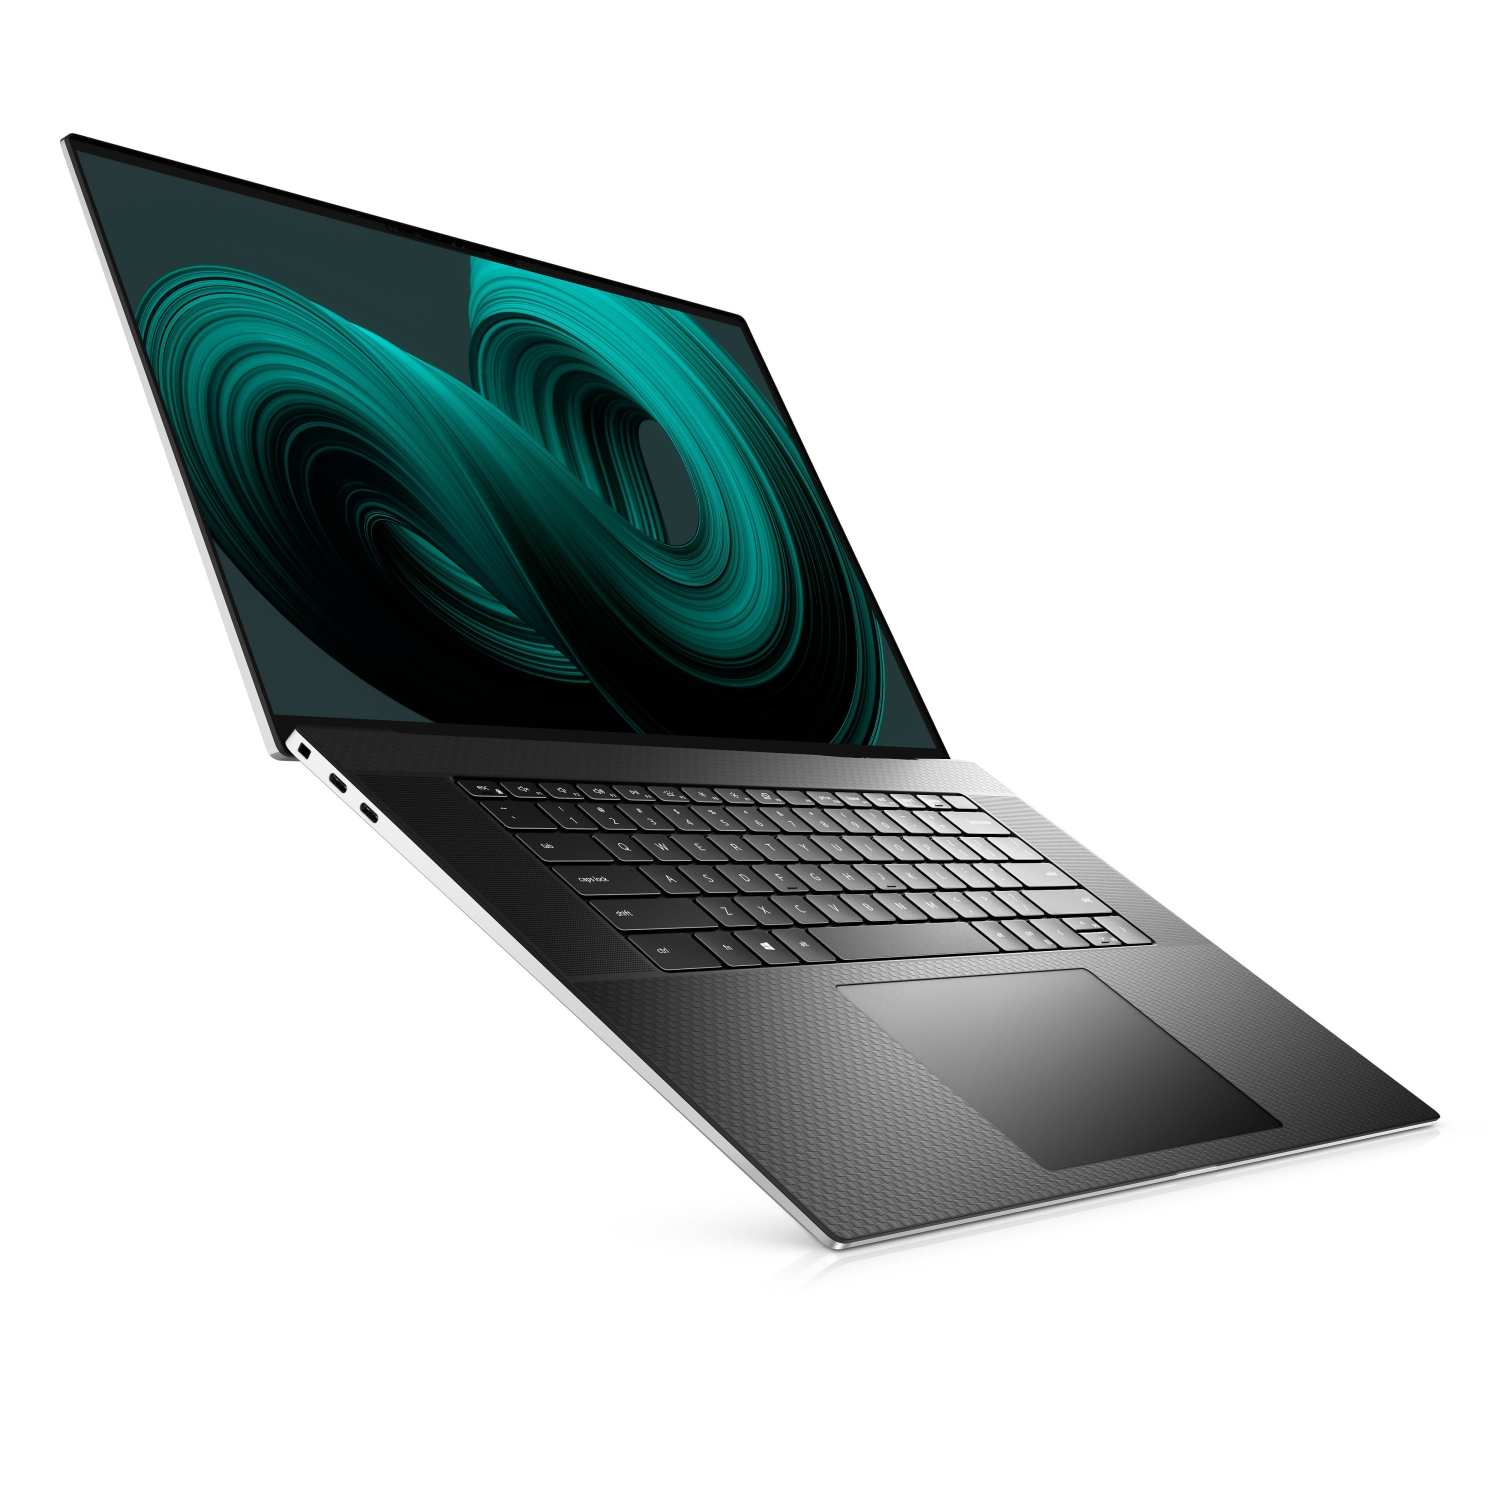 Refurbished (Excellent) – Dell XPS 9710 Laptop (2021) | 17" 4K Touch | Core i7 - 8TB SSD - 64GB RAM - RTX 3060 | 8 Cores @ 4.6 GHz - 11th Gen CPU - 12GB GDDR6